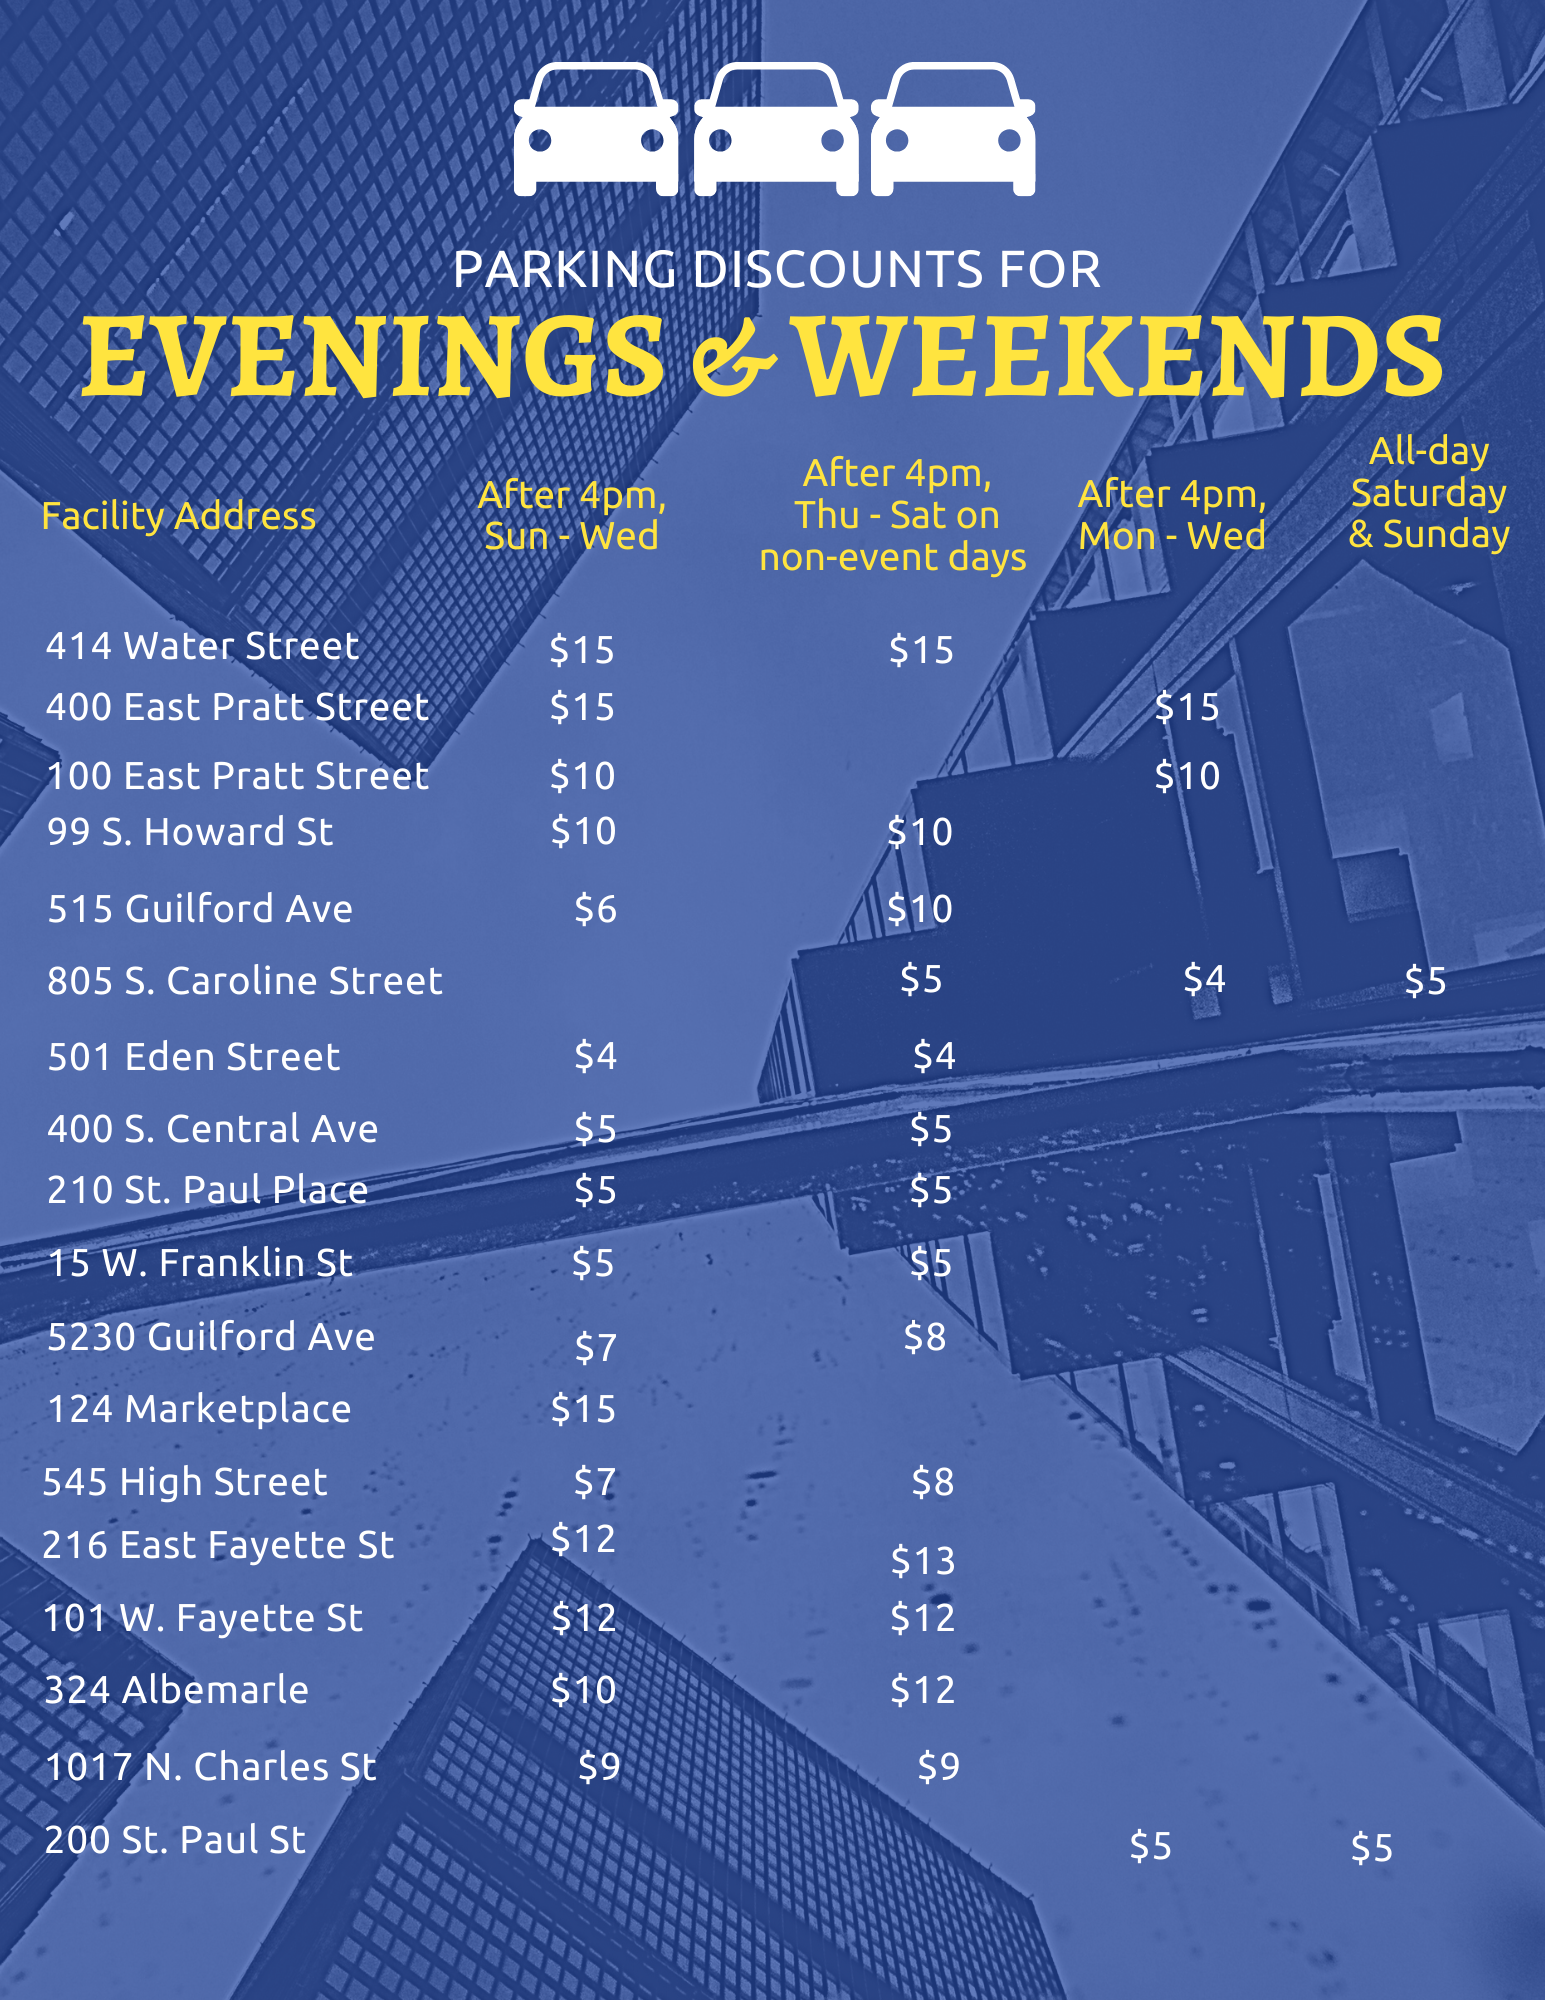 Evenings and weekend parking rates